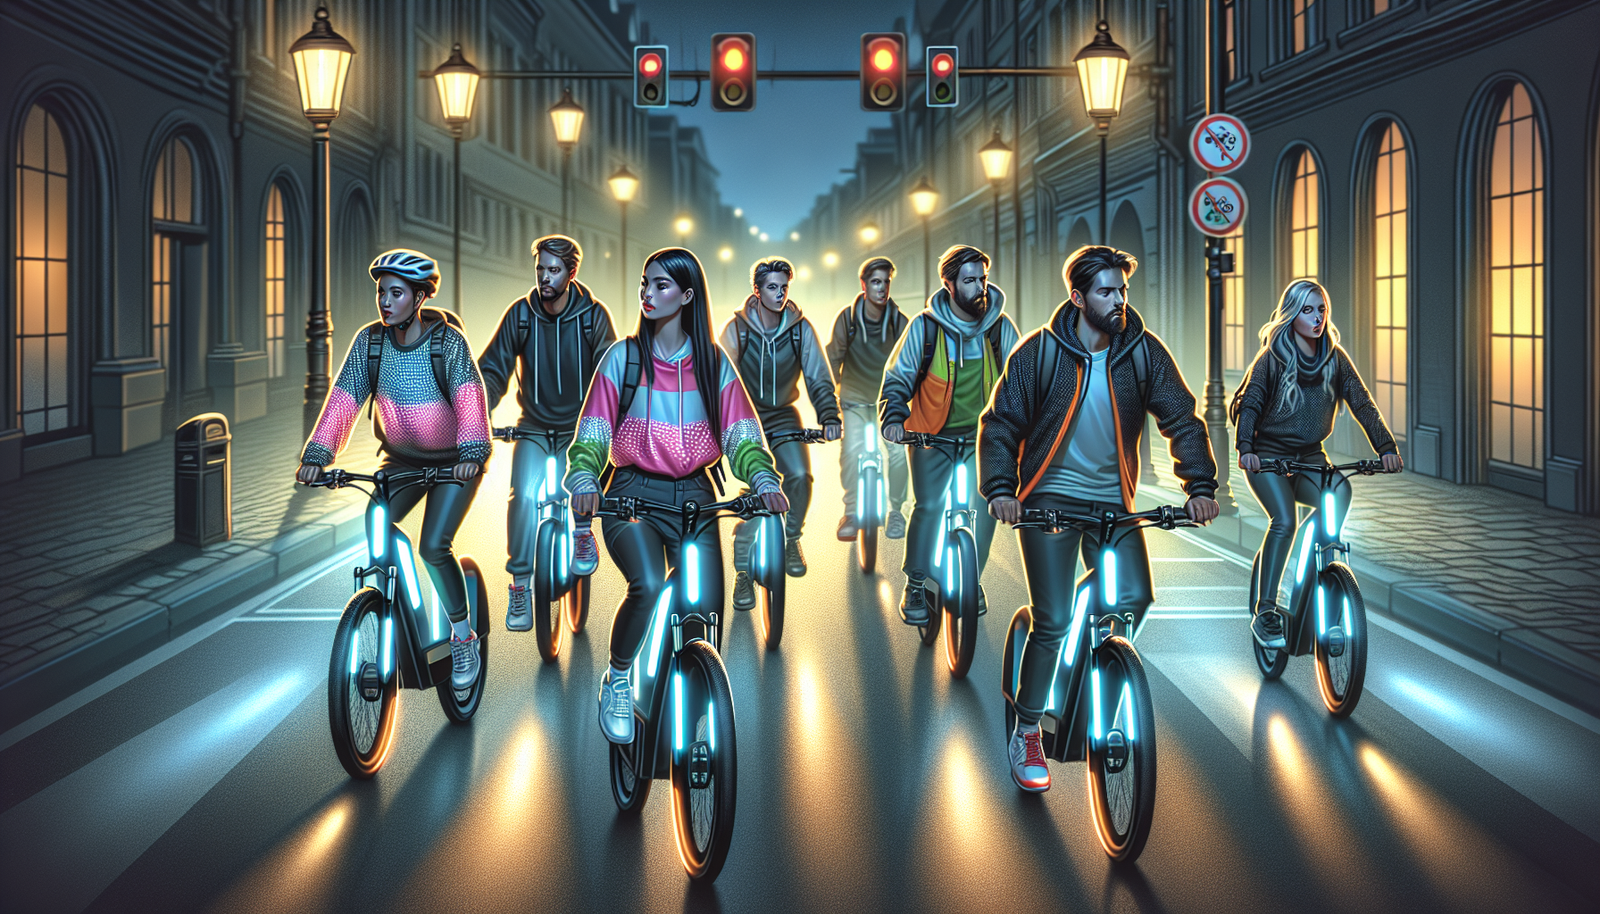 Are There Any Specific Rules For Riding Electric Bikes At Night?